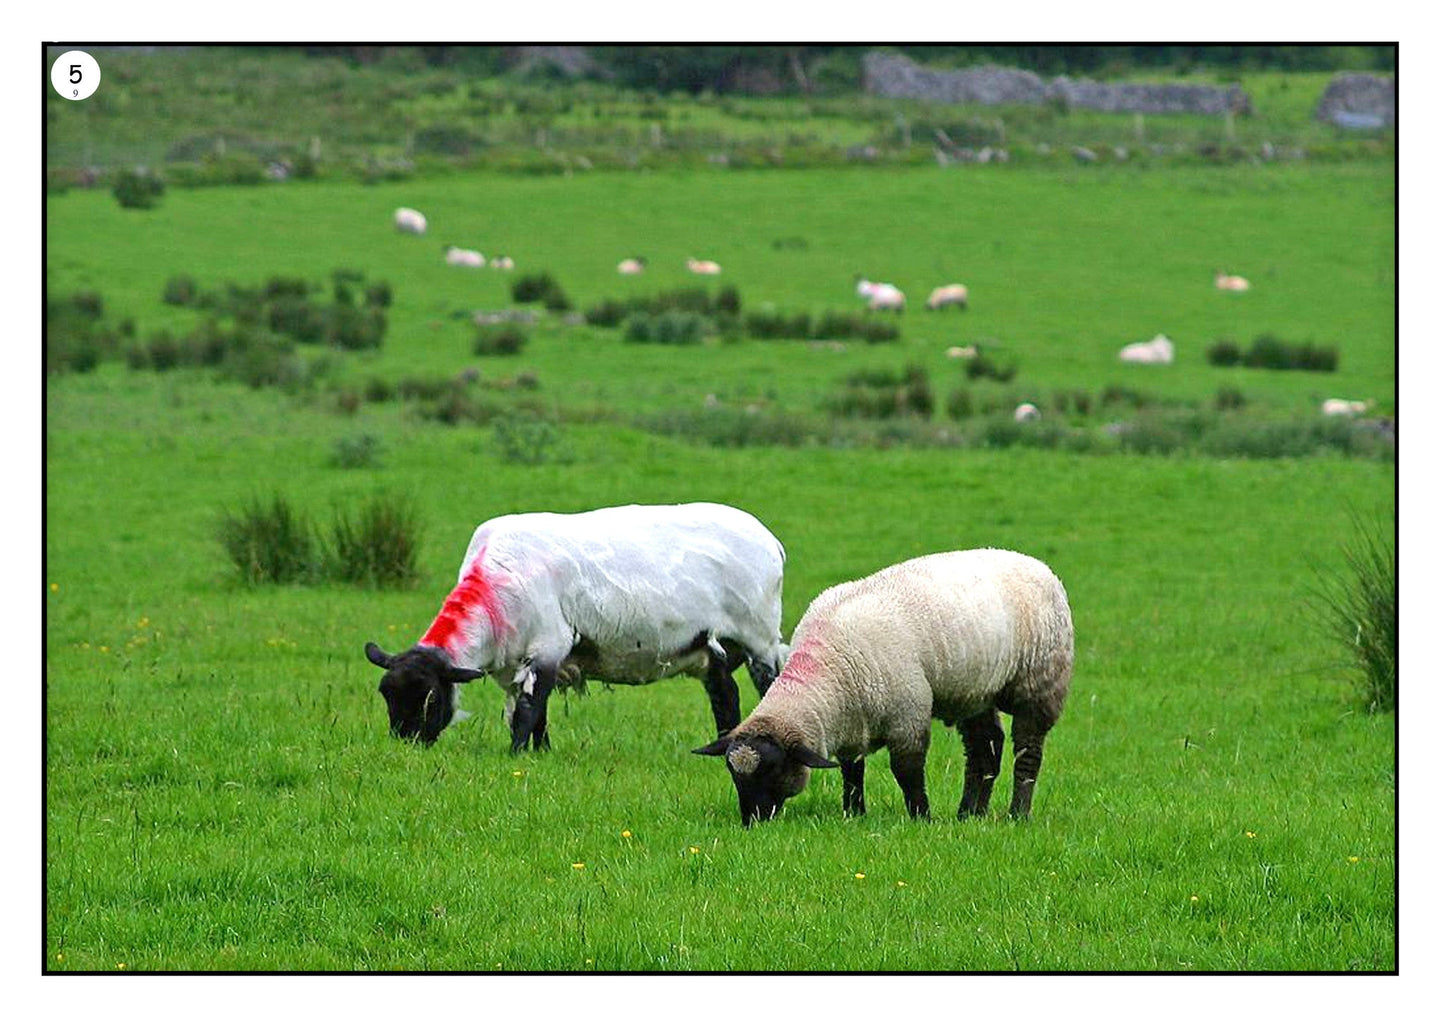 On the Sheep Farm Photo Pack